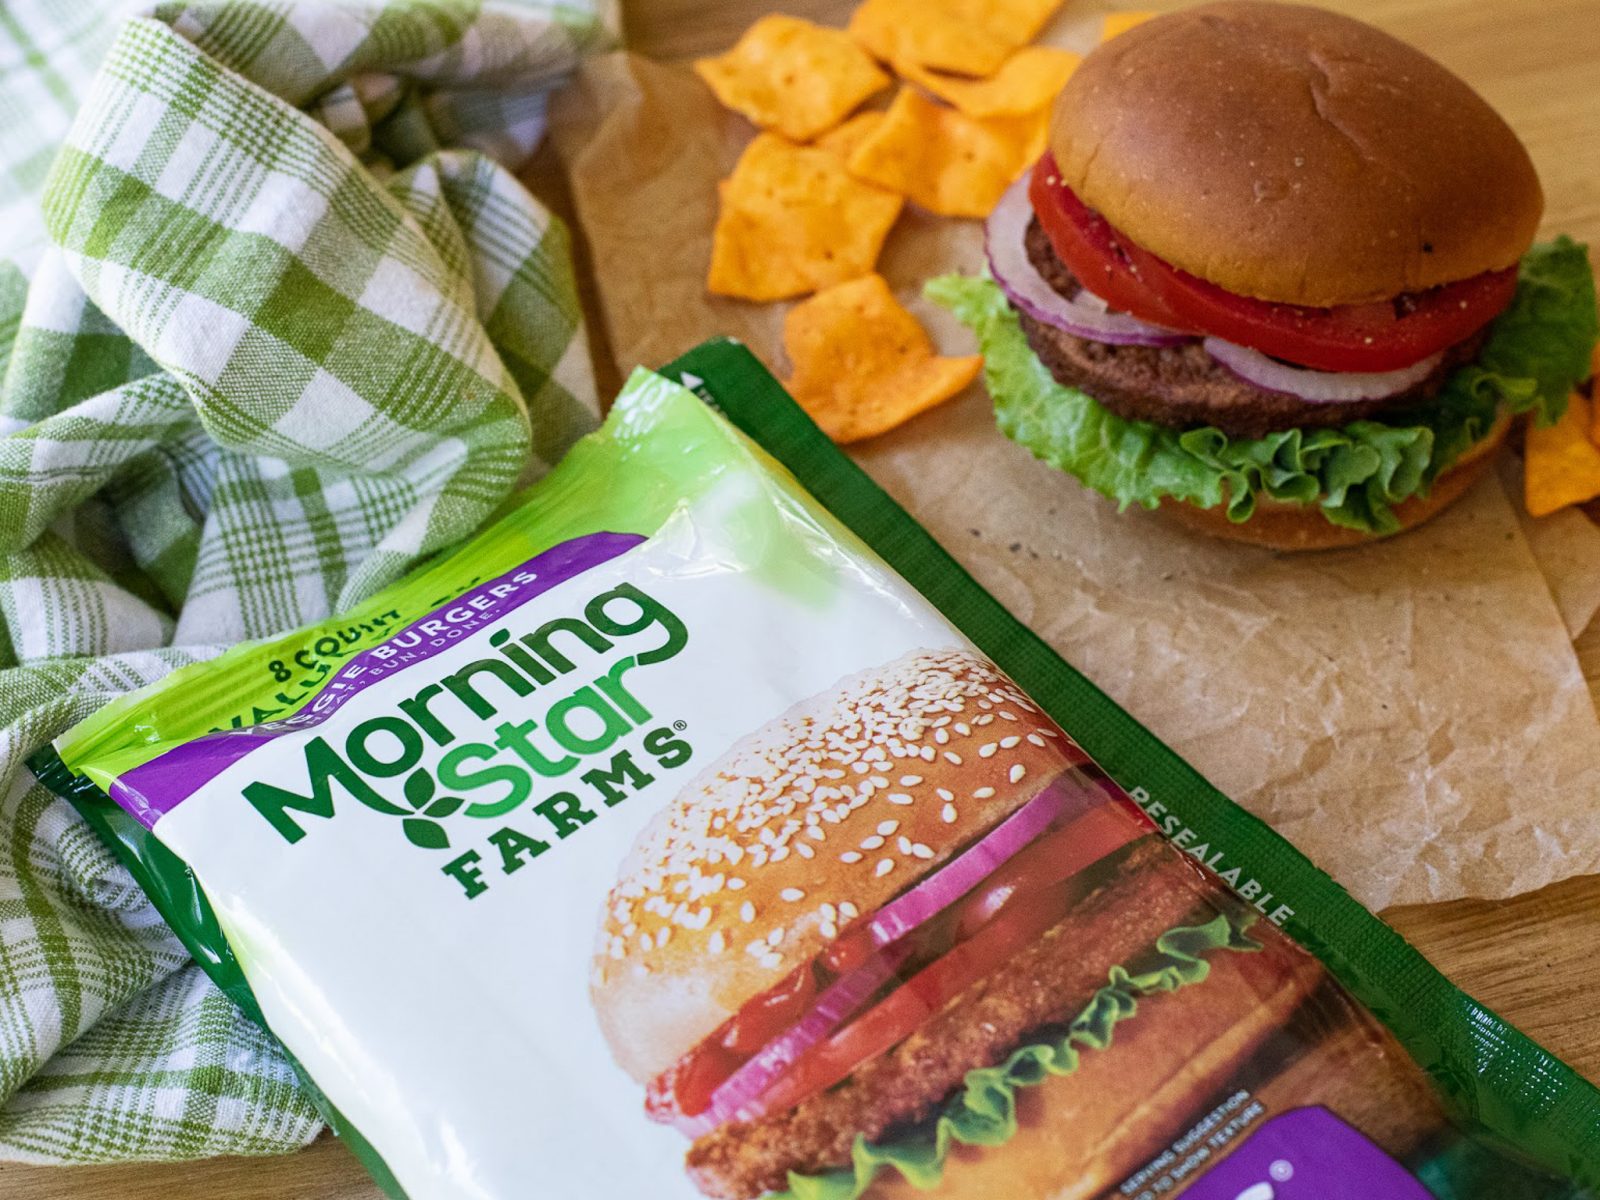 Grab A MorningStar Farms Breakfast Item AND A Pack Of Burgers For FREE At Publix! – Ends Soon